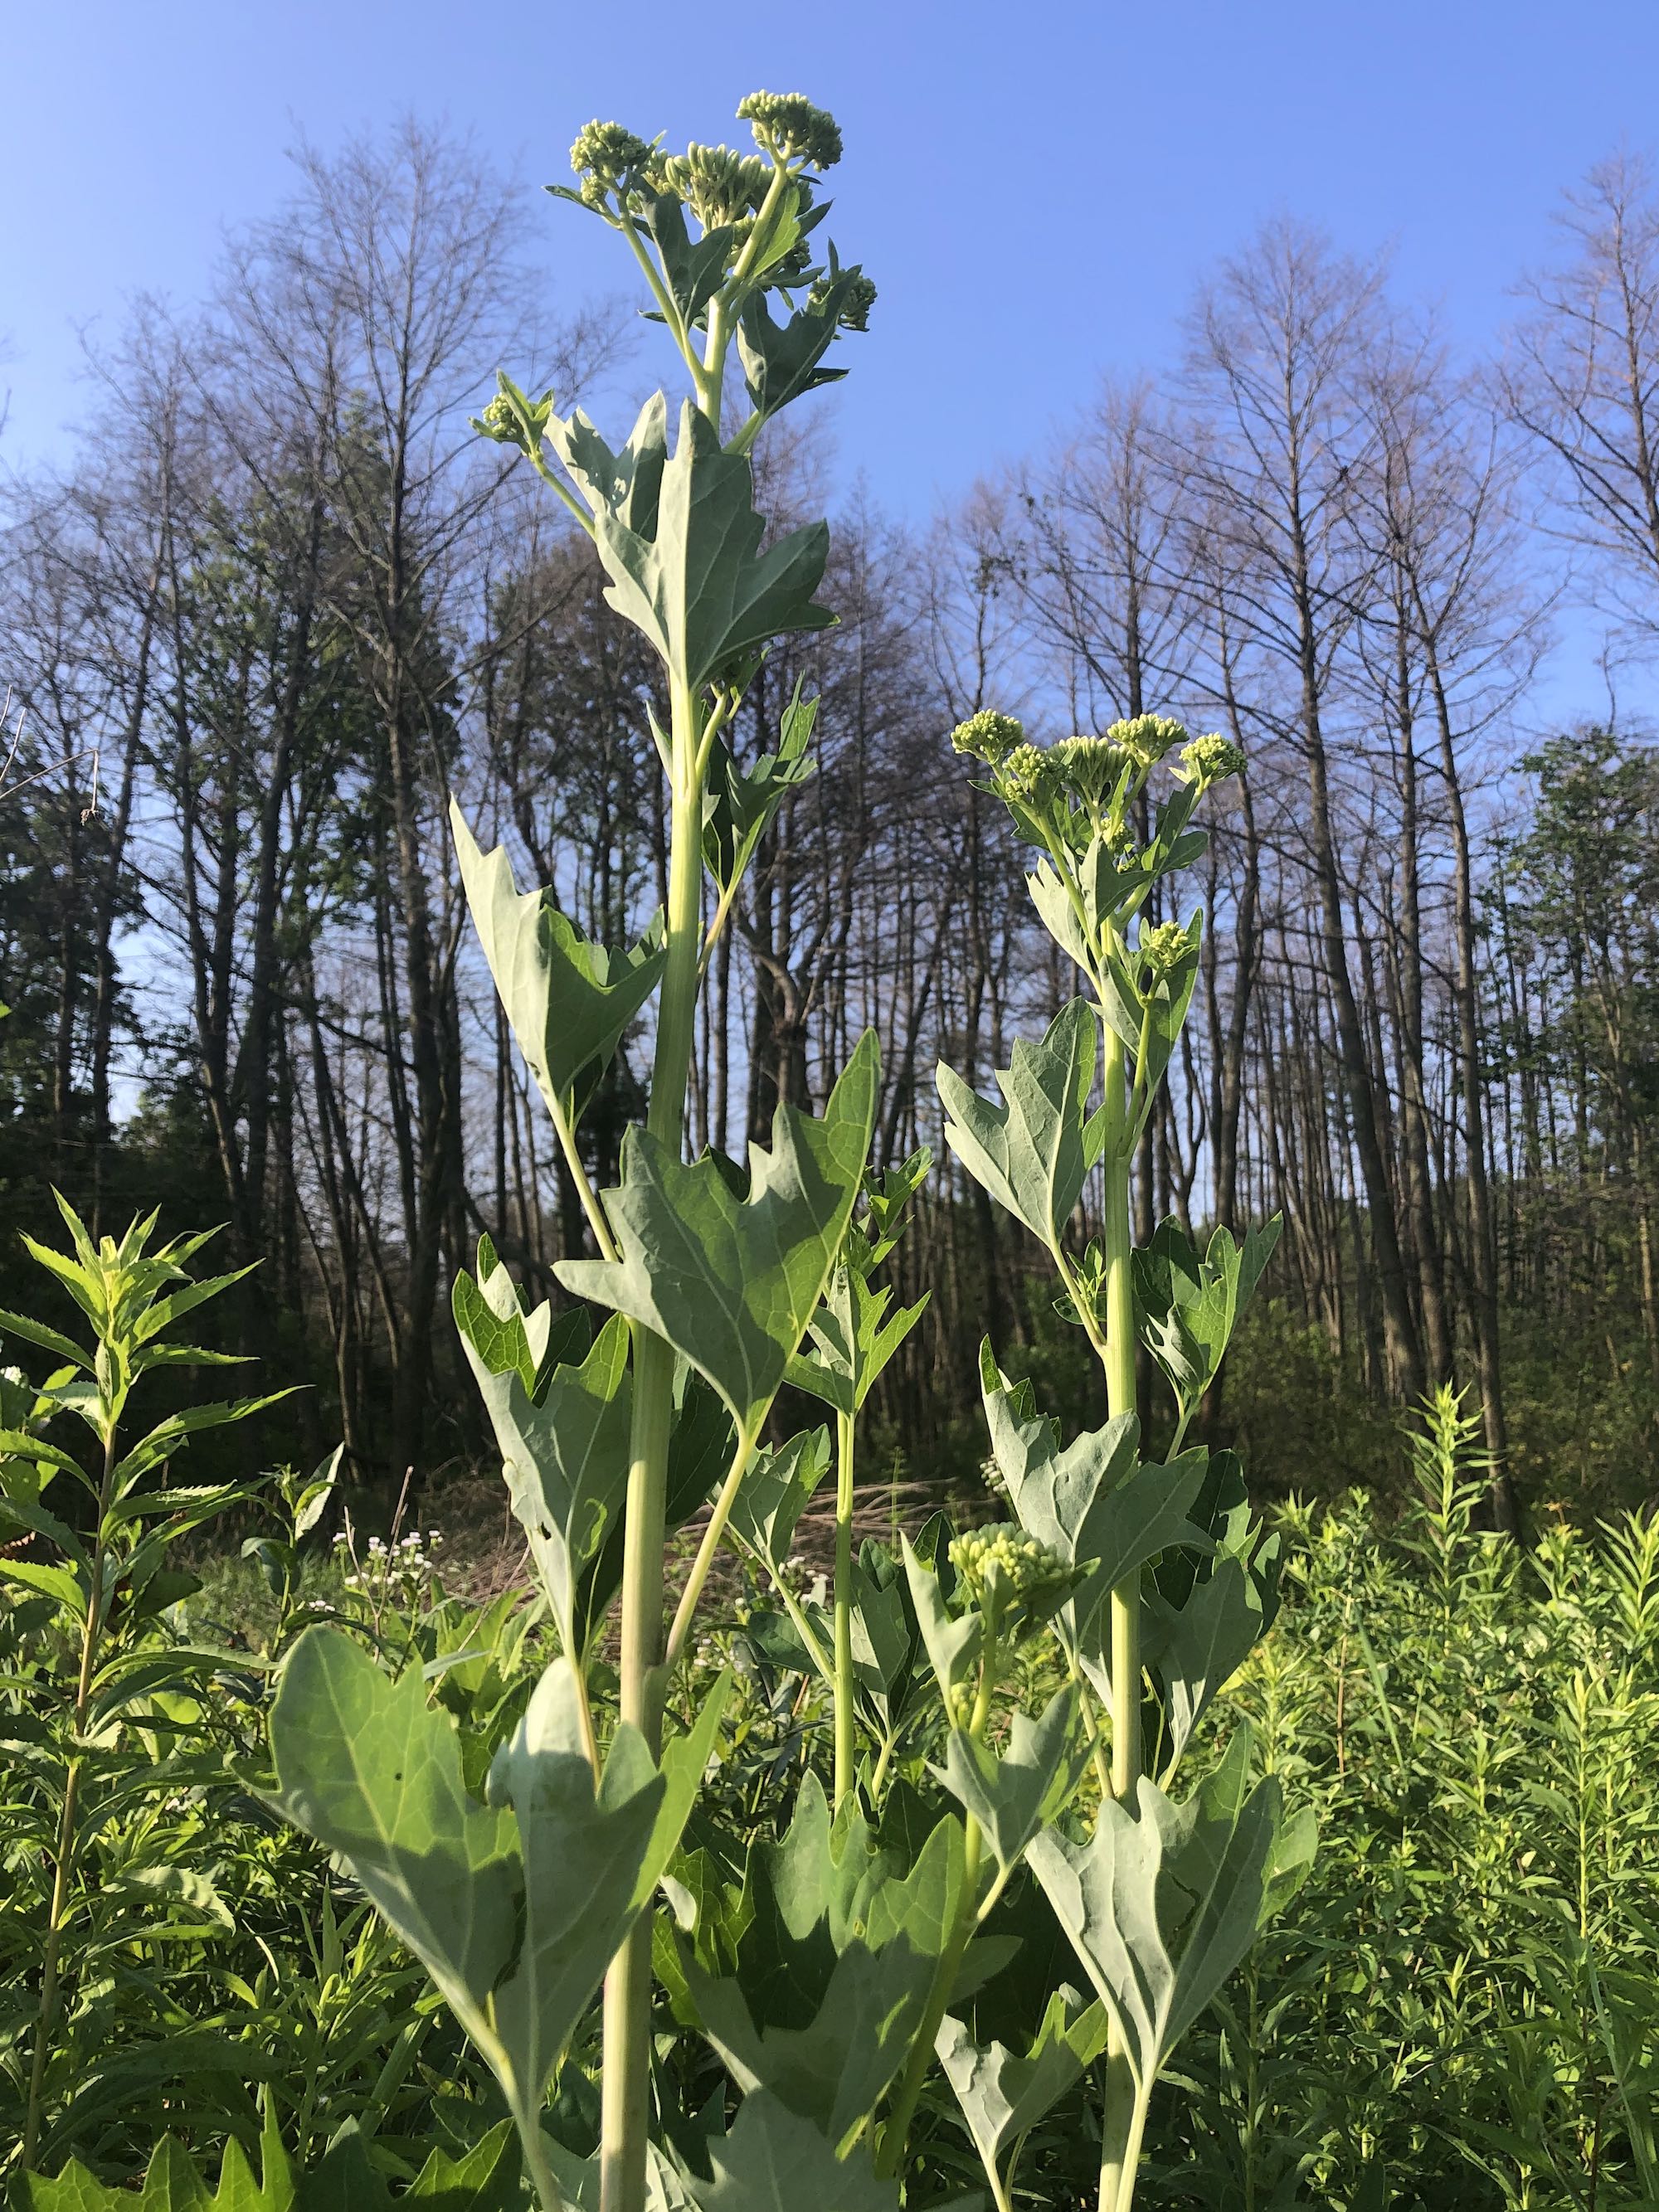 Pale Indian Plantain in Marion Dunn Prairie in Madison, Wisconsin on July 6, 2020.